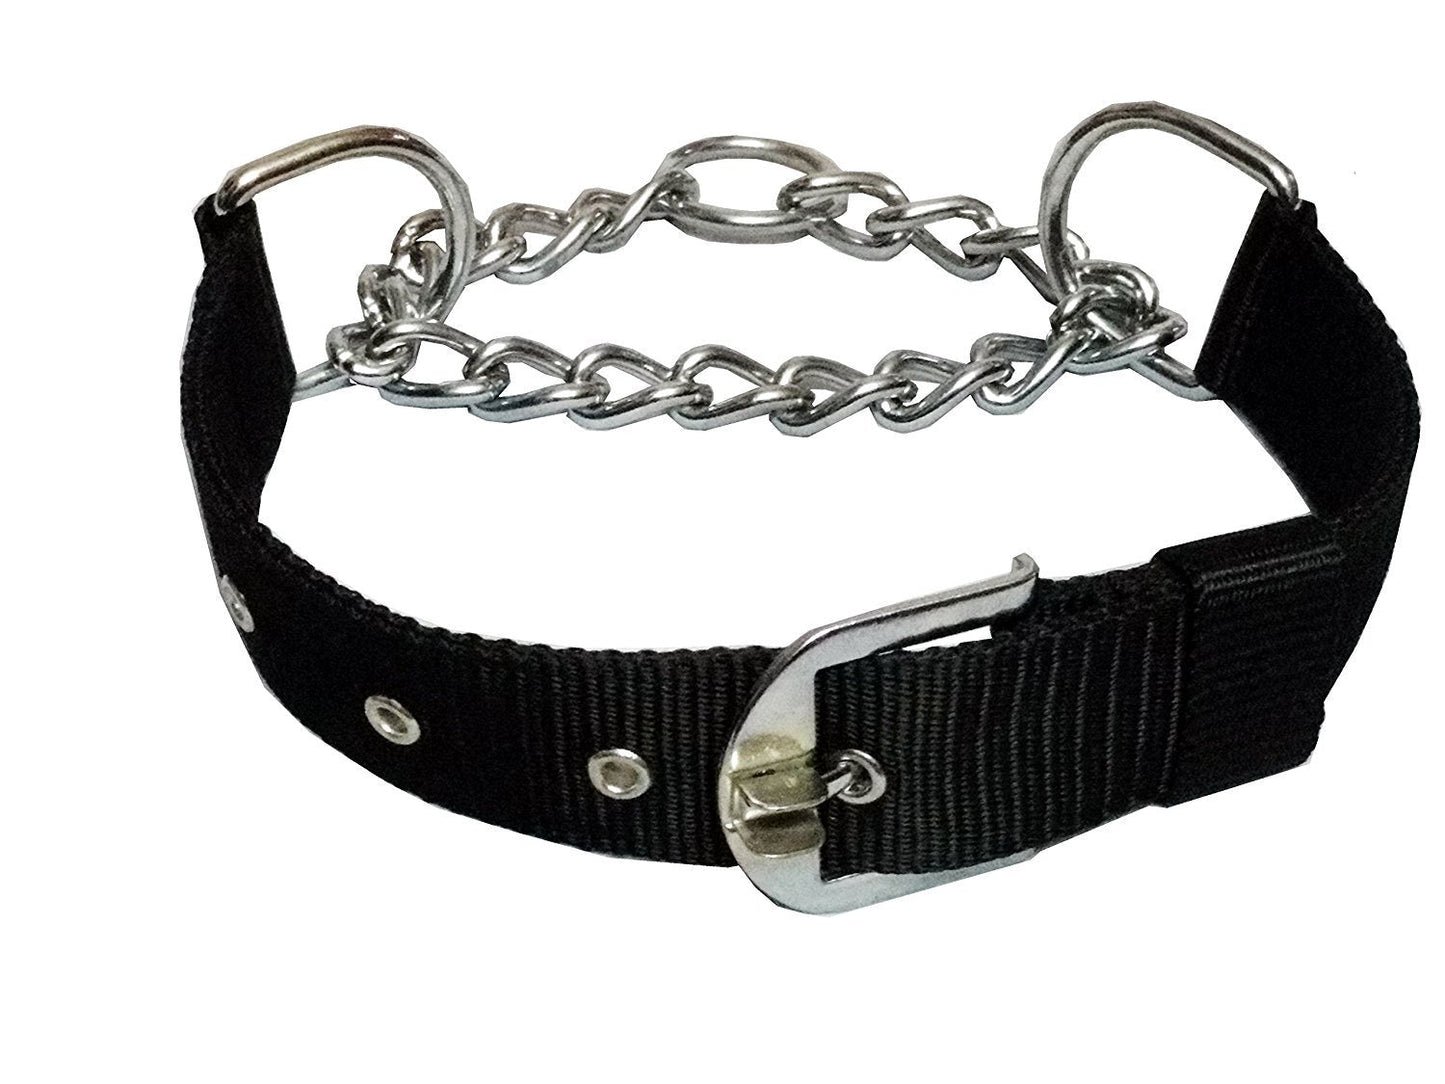 Choke Collar 1 Inch for Medium and Large Dogs freeshipping - Indihopshop